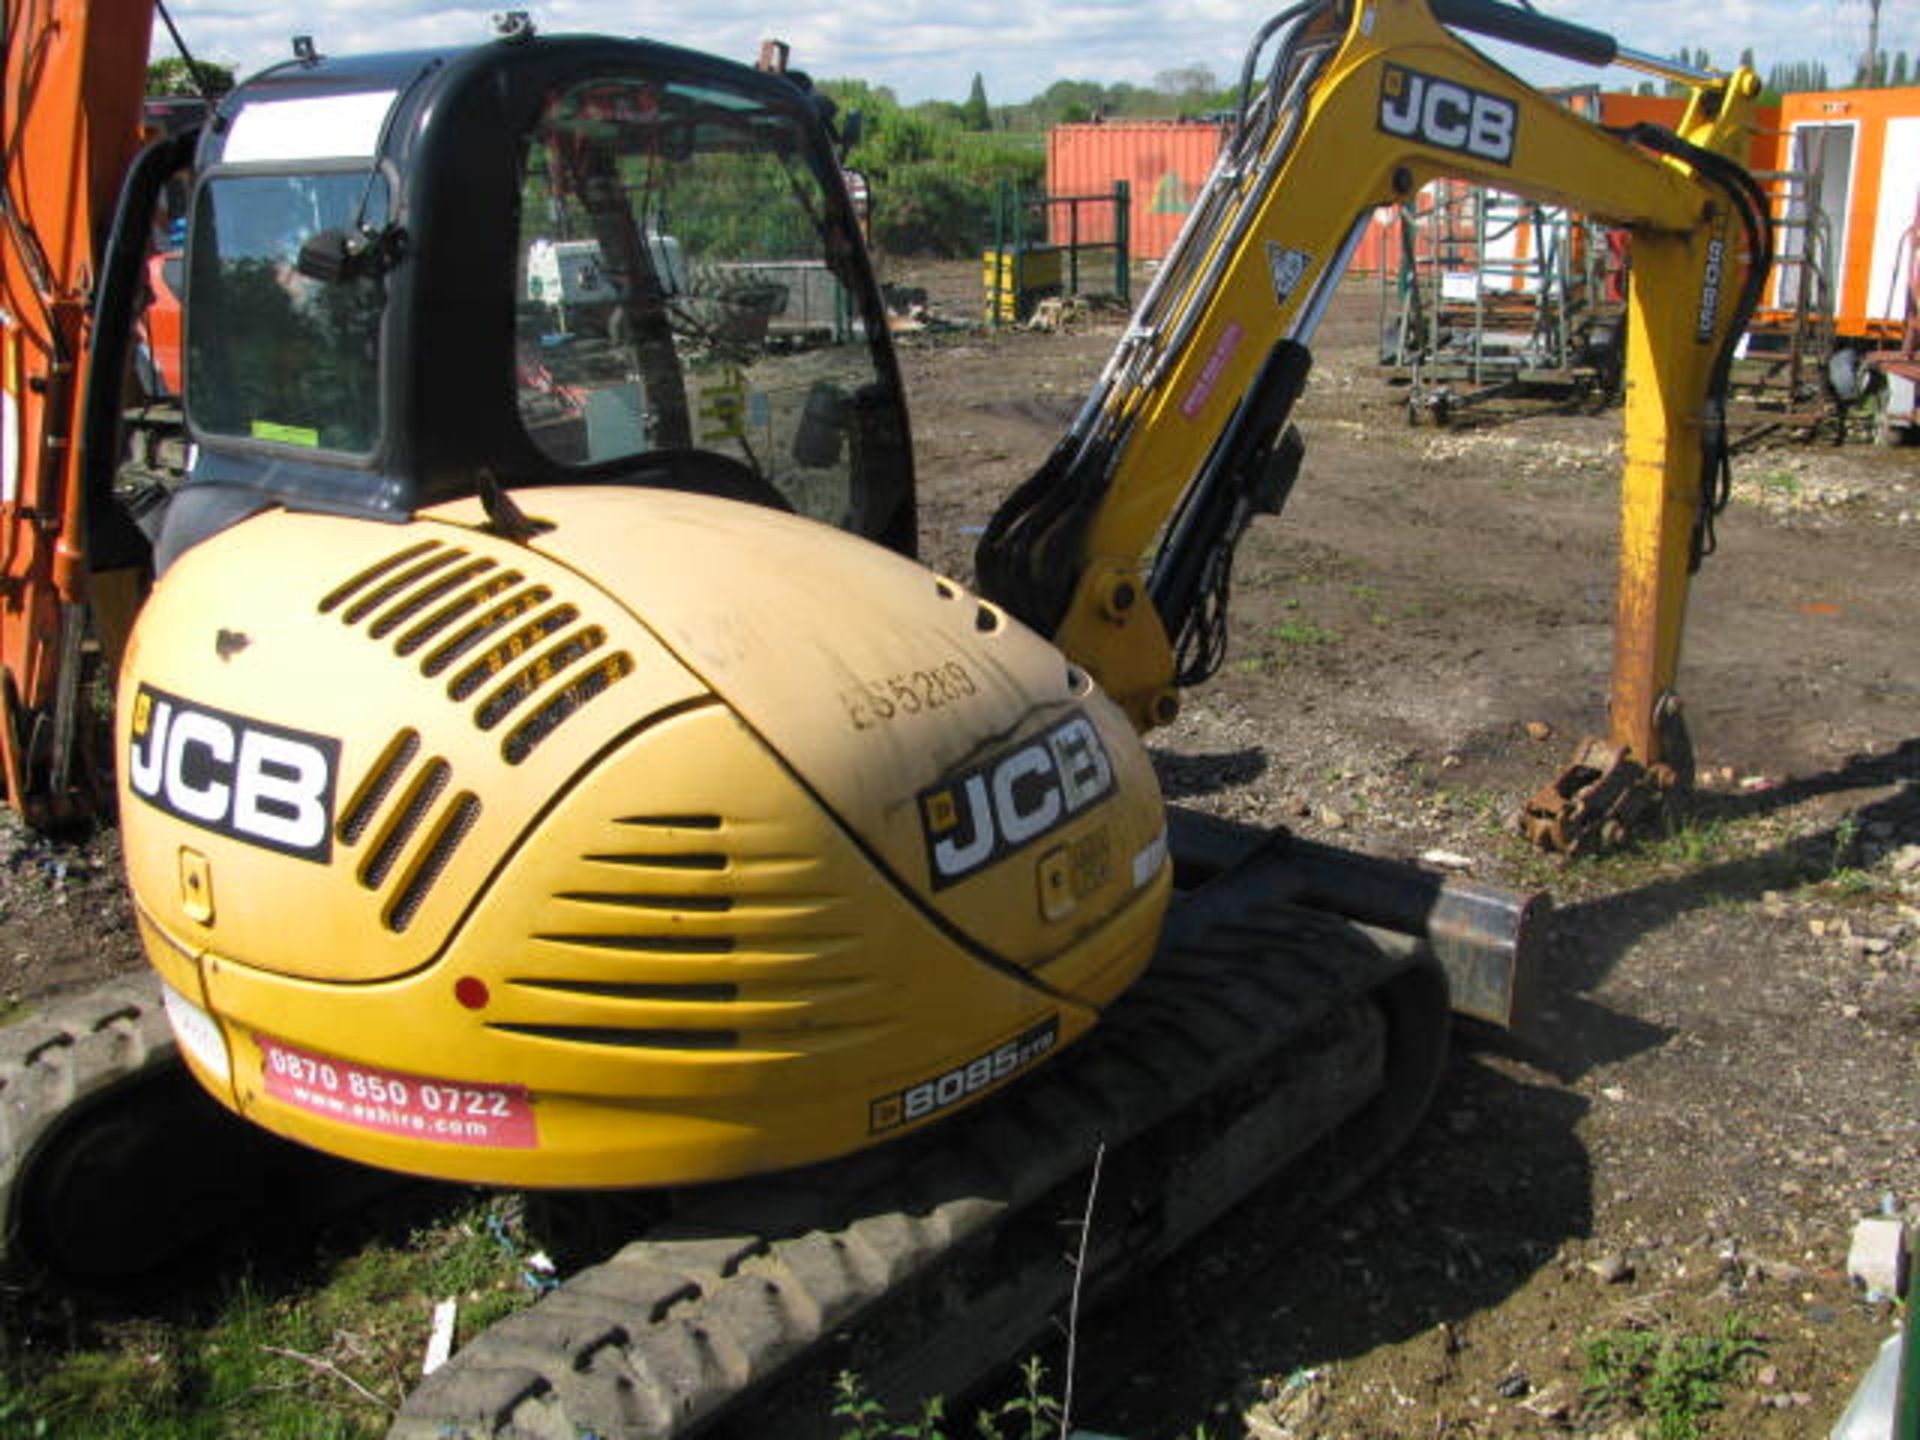 JCB 8085 ZTS rubber tracked excavator - Image 6 of 6